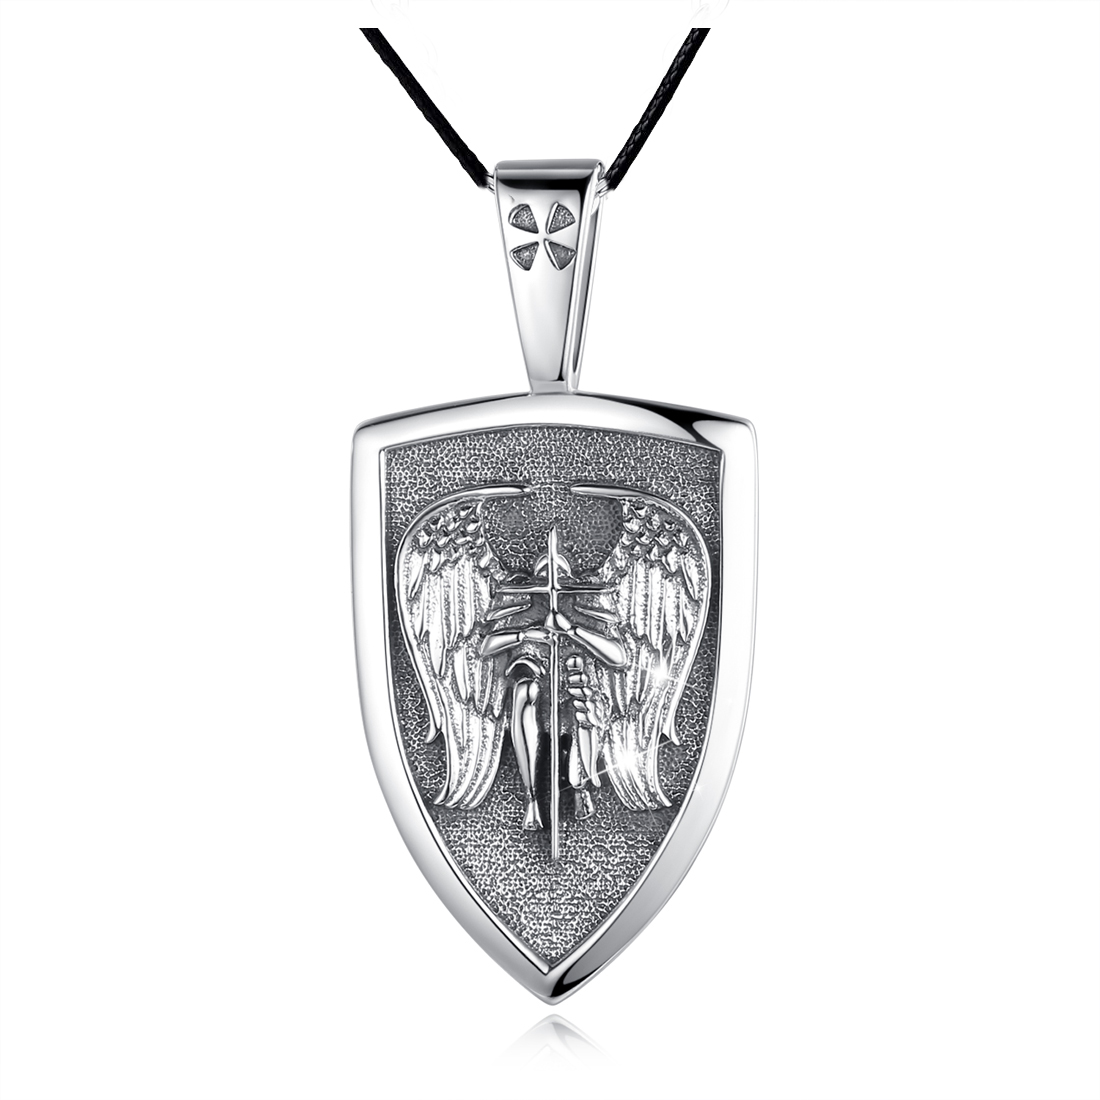 Merryshine Jewelry S925 Sterling Silver Knight Shield Men's Chains ...